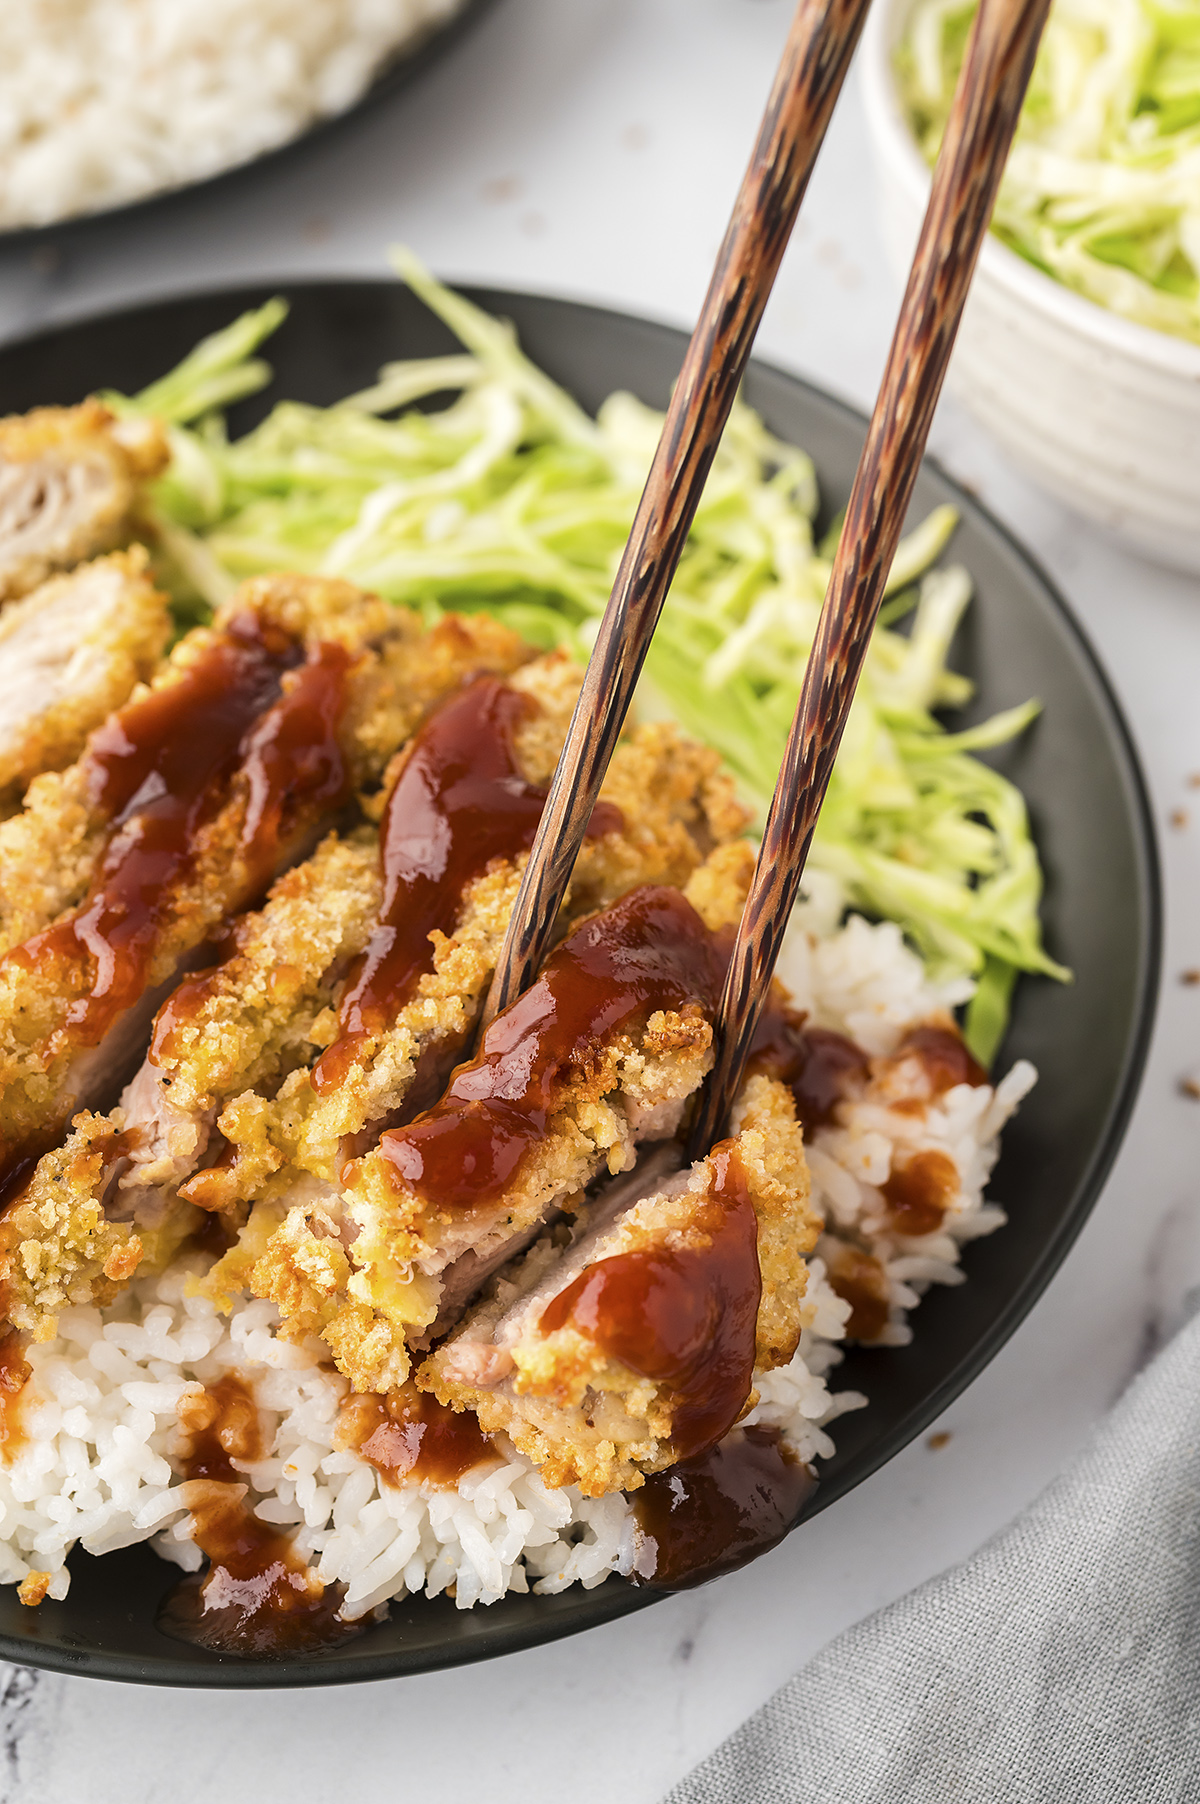 Chicken katsu served in a black bowl with rice and noodles.